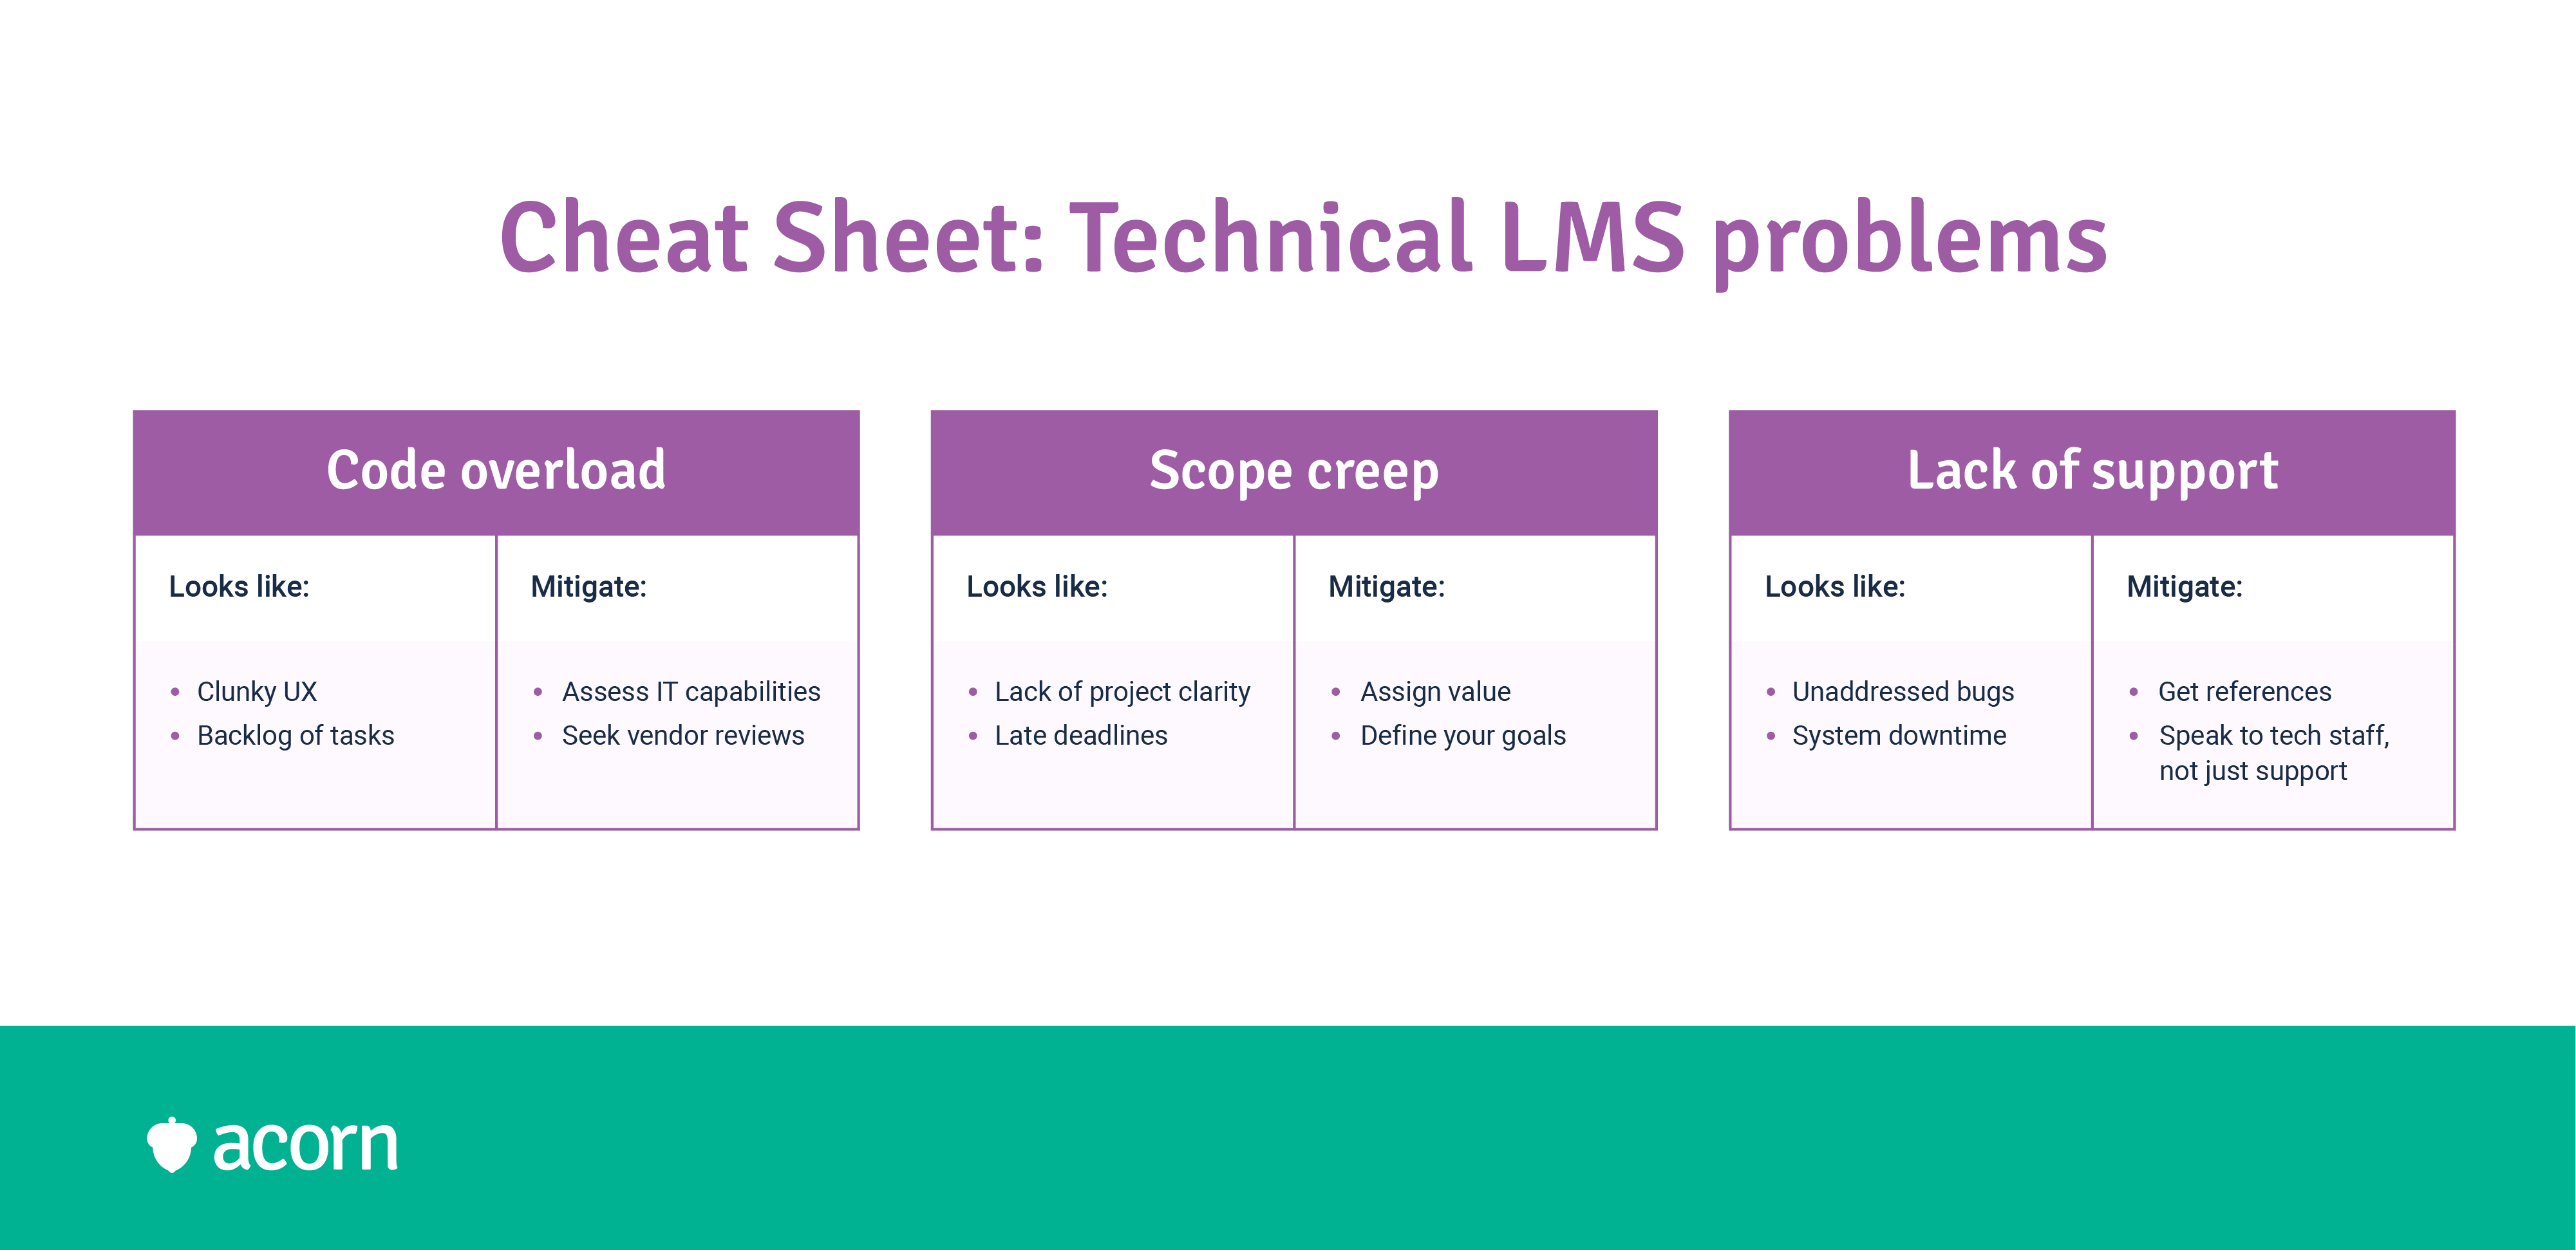 Tables outlining the technical risks associated with LMSs and how to mitigate them. 